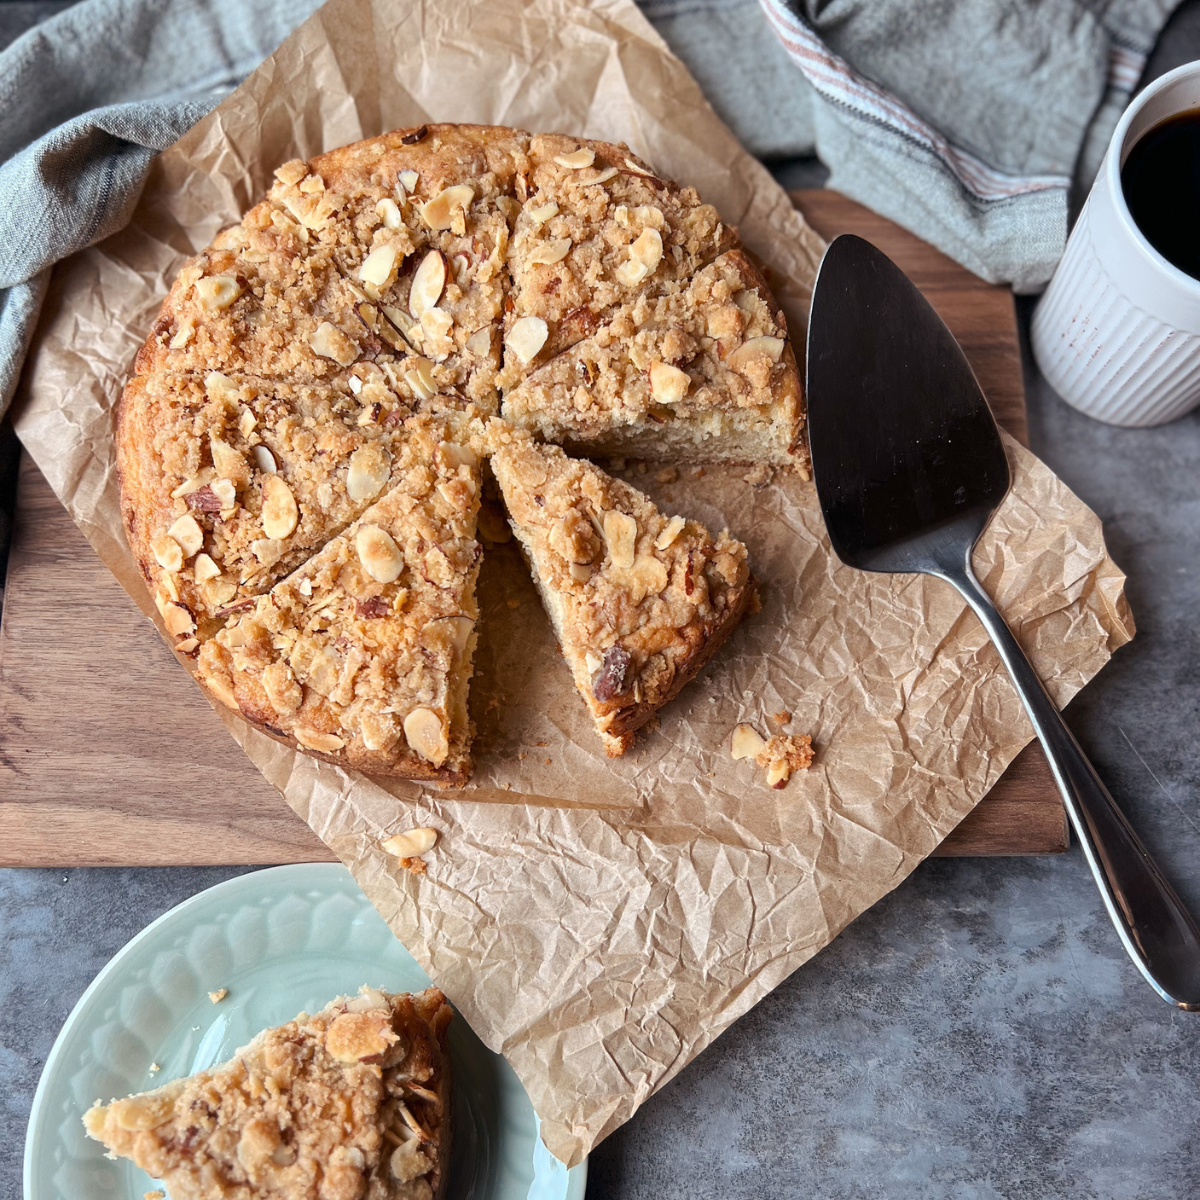 Almond coffee cake on parchment paper and a cutting board with a slice of coffee cake on a plate near it and a cup of coffee on the top right corner.